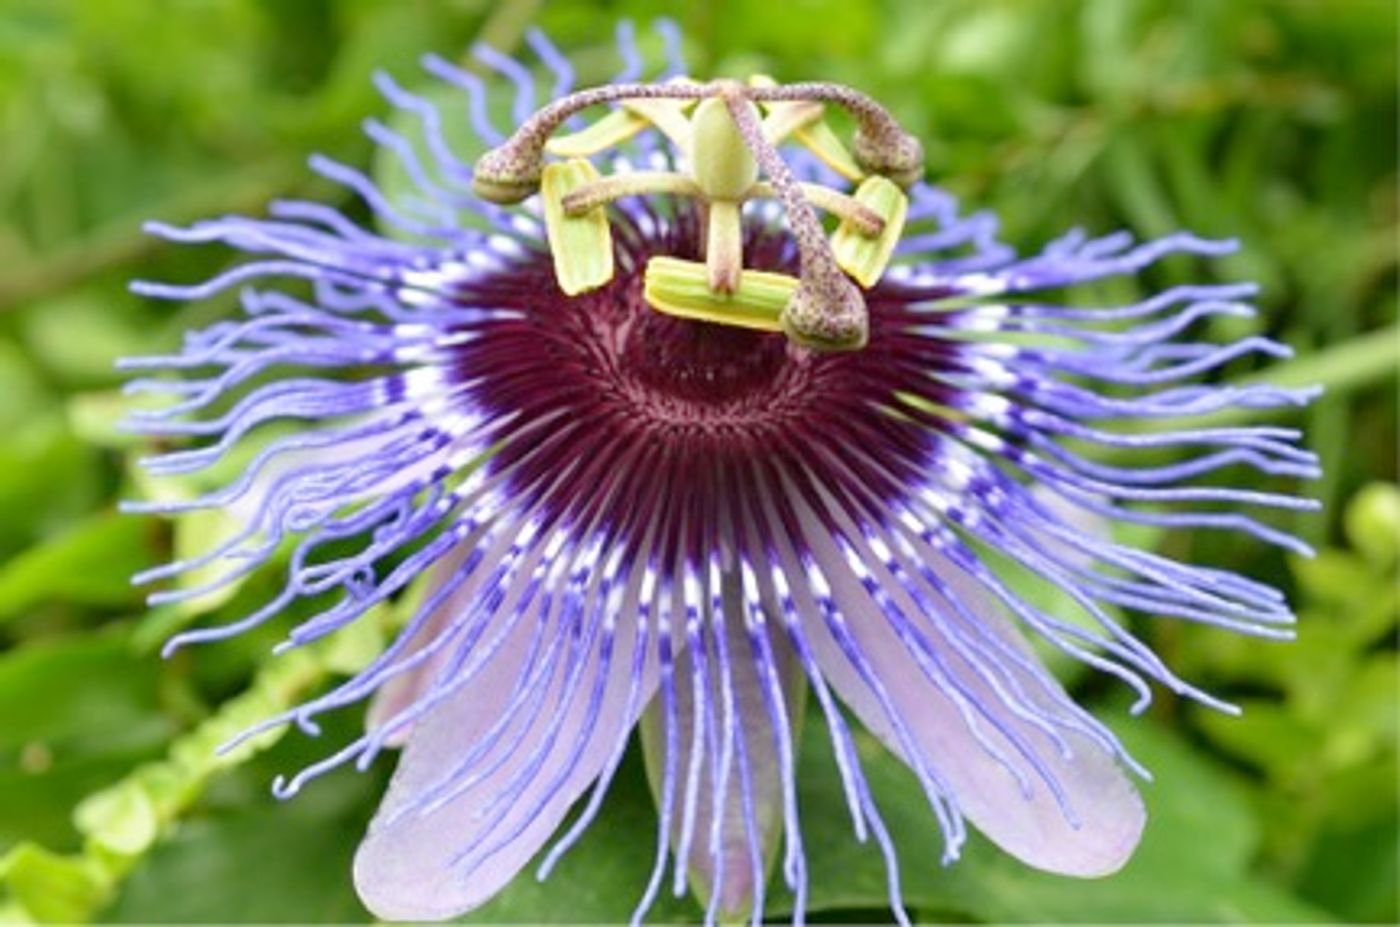 Extracts from the Passionflower delayed aging in yeast